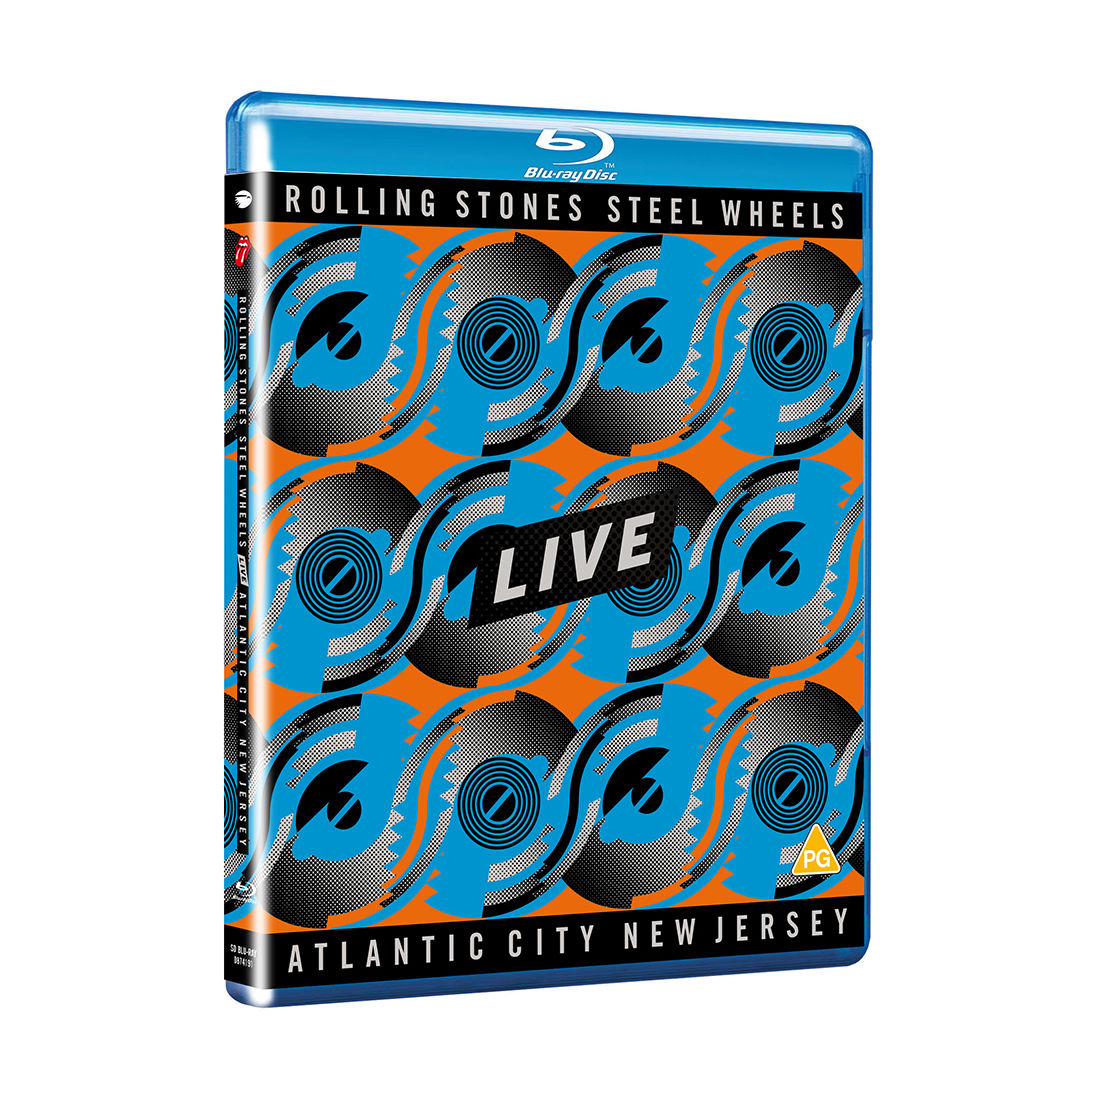 The Rolling Stones - Steel Wheels Live SD Blu-Ray